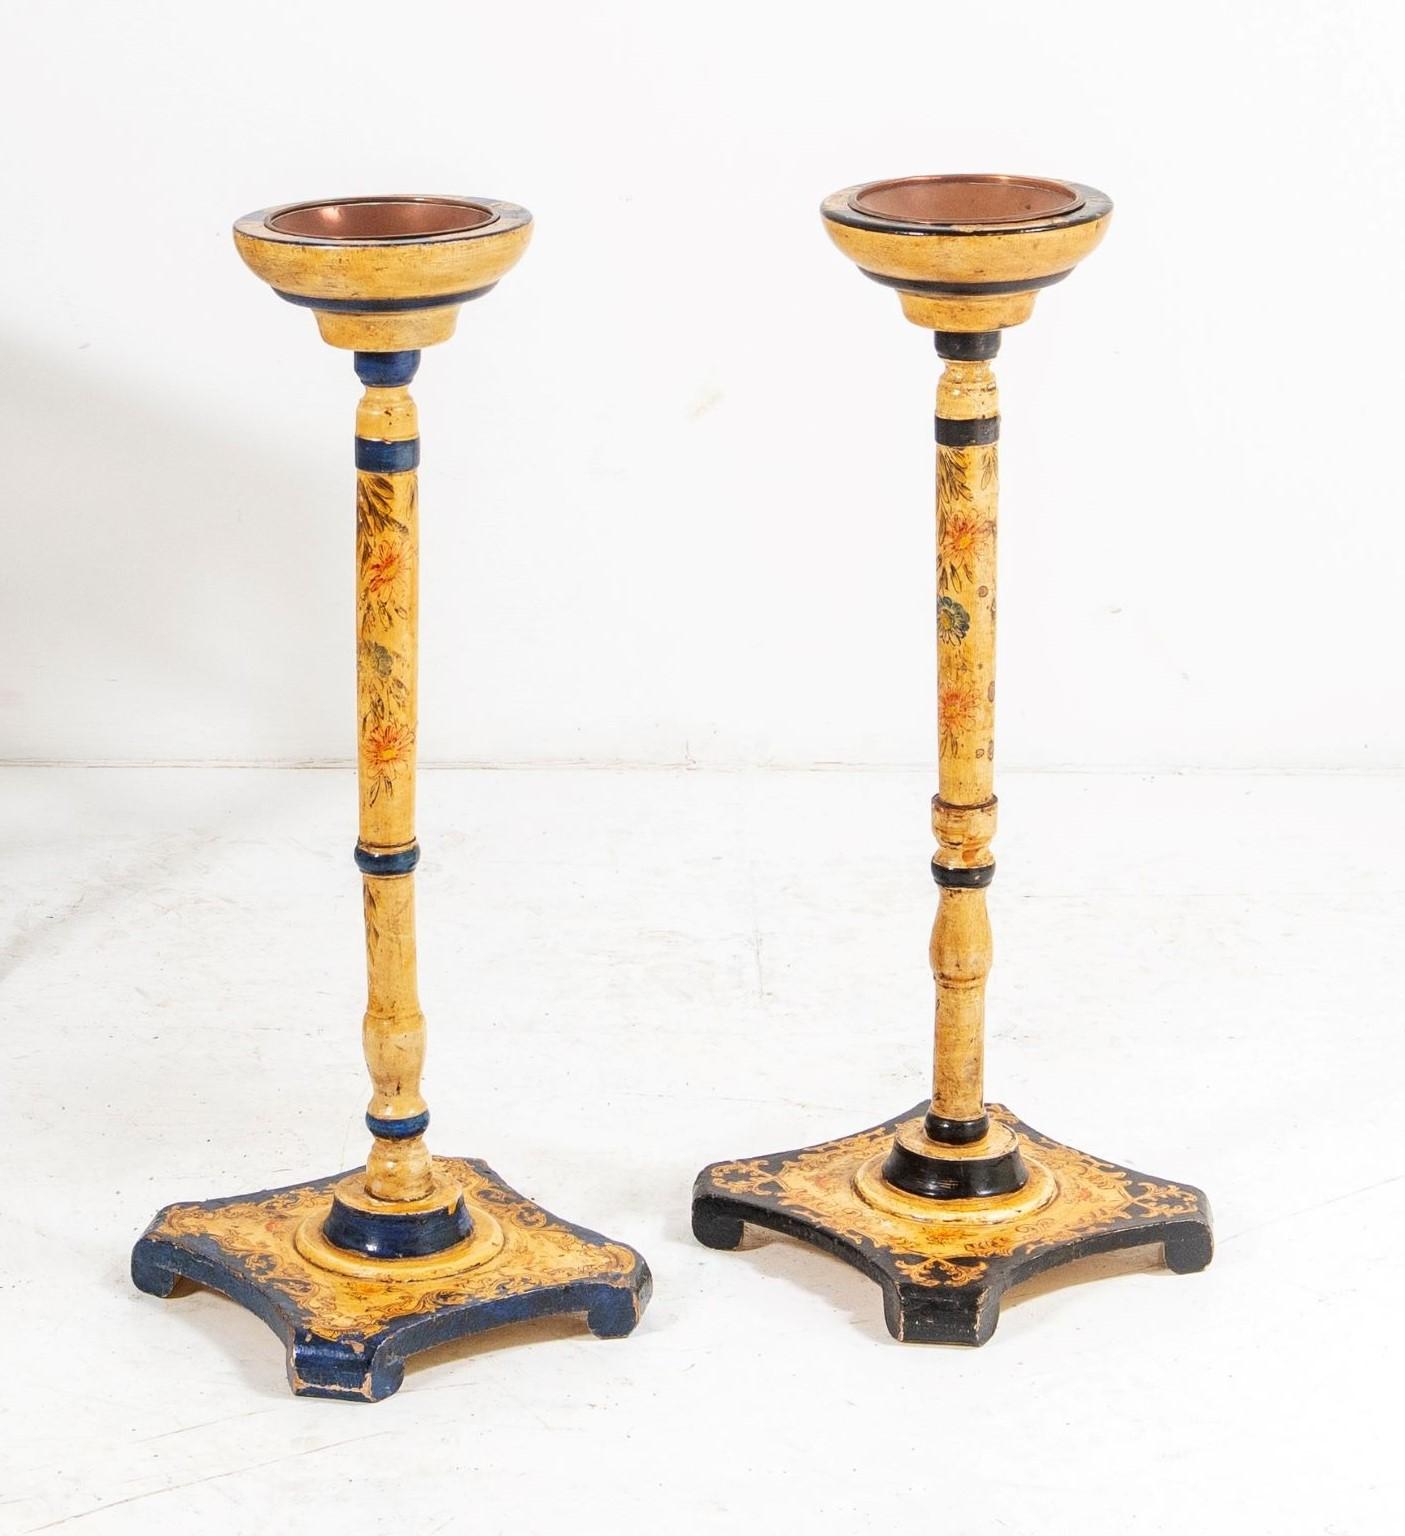 An unusual, rare pair of hand painted floor standing ashtrays, probably Asian, mid/late 19th Century. Highly decorative with hand painted floral decoration on Gesso.
Not an exact pair, one dark blue and the other in black with slight variation in